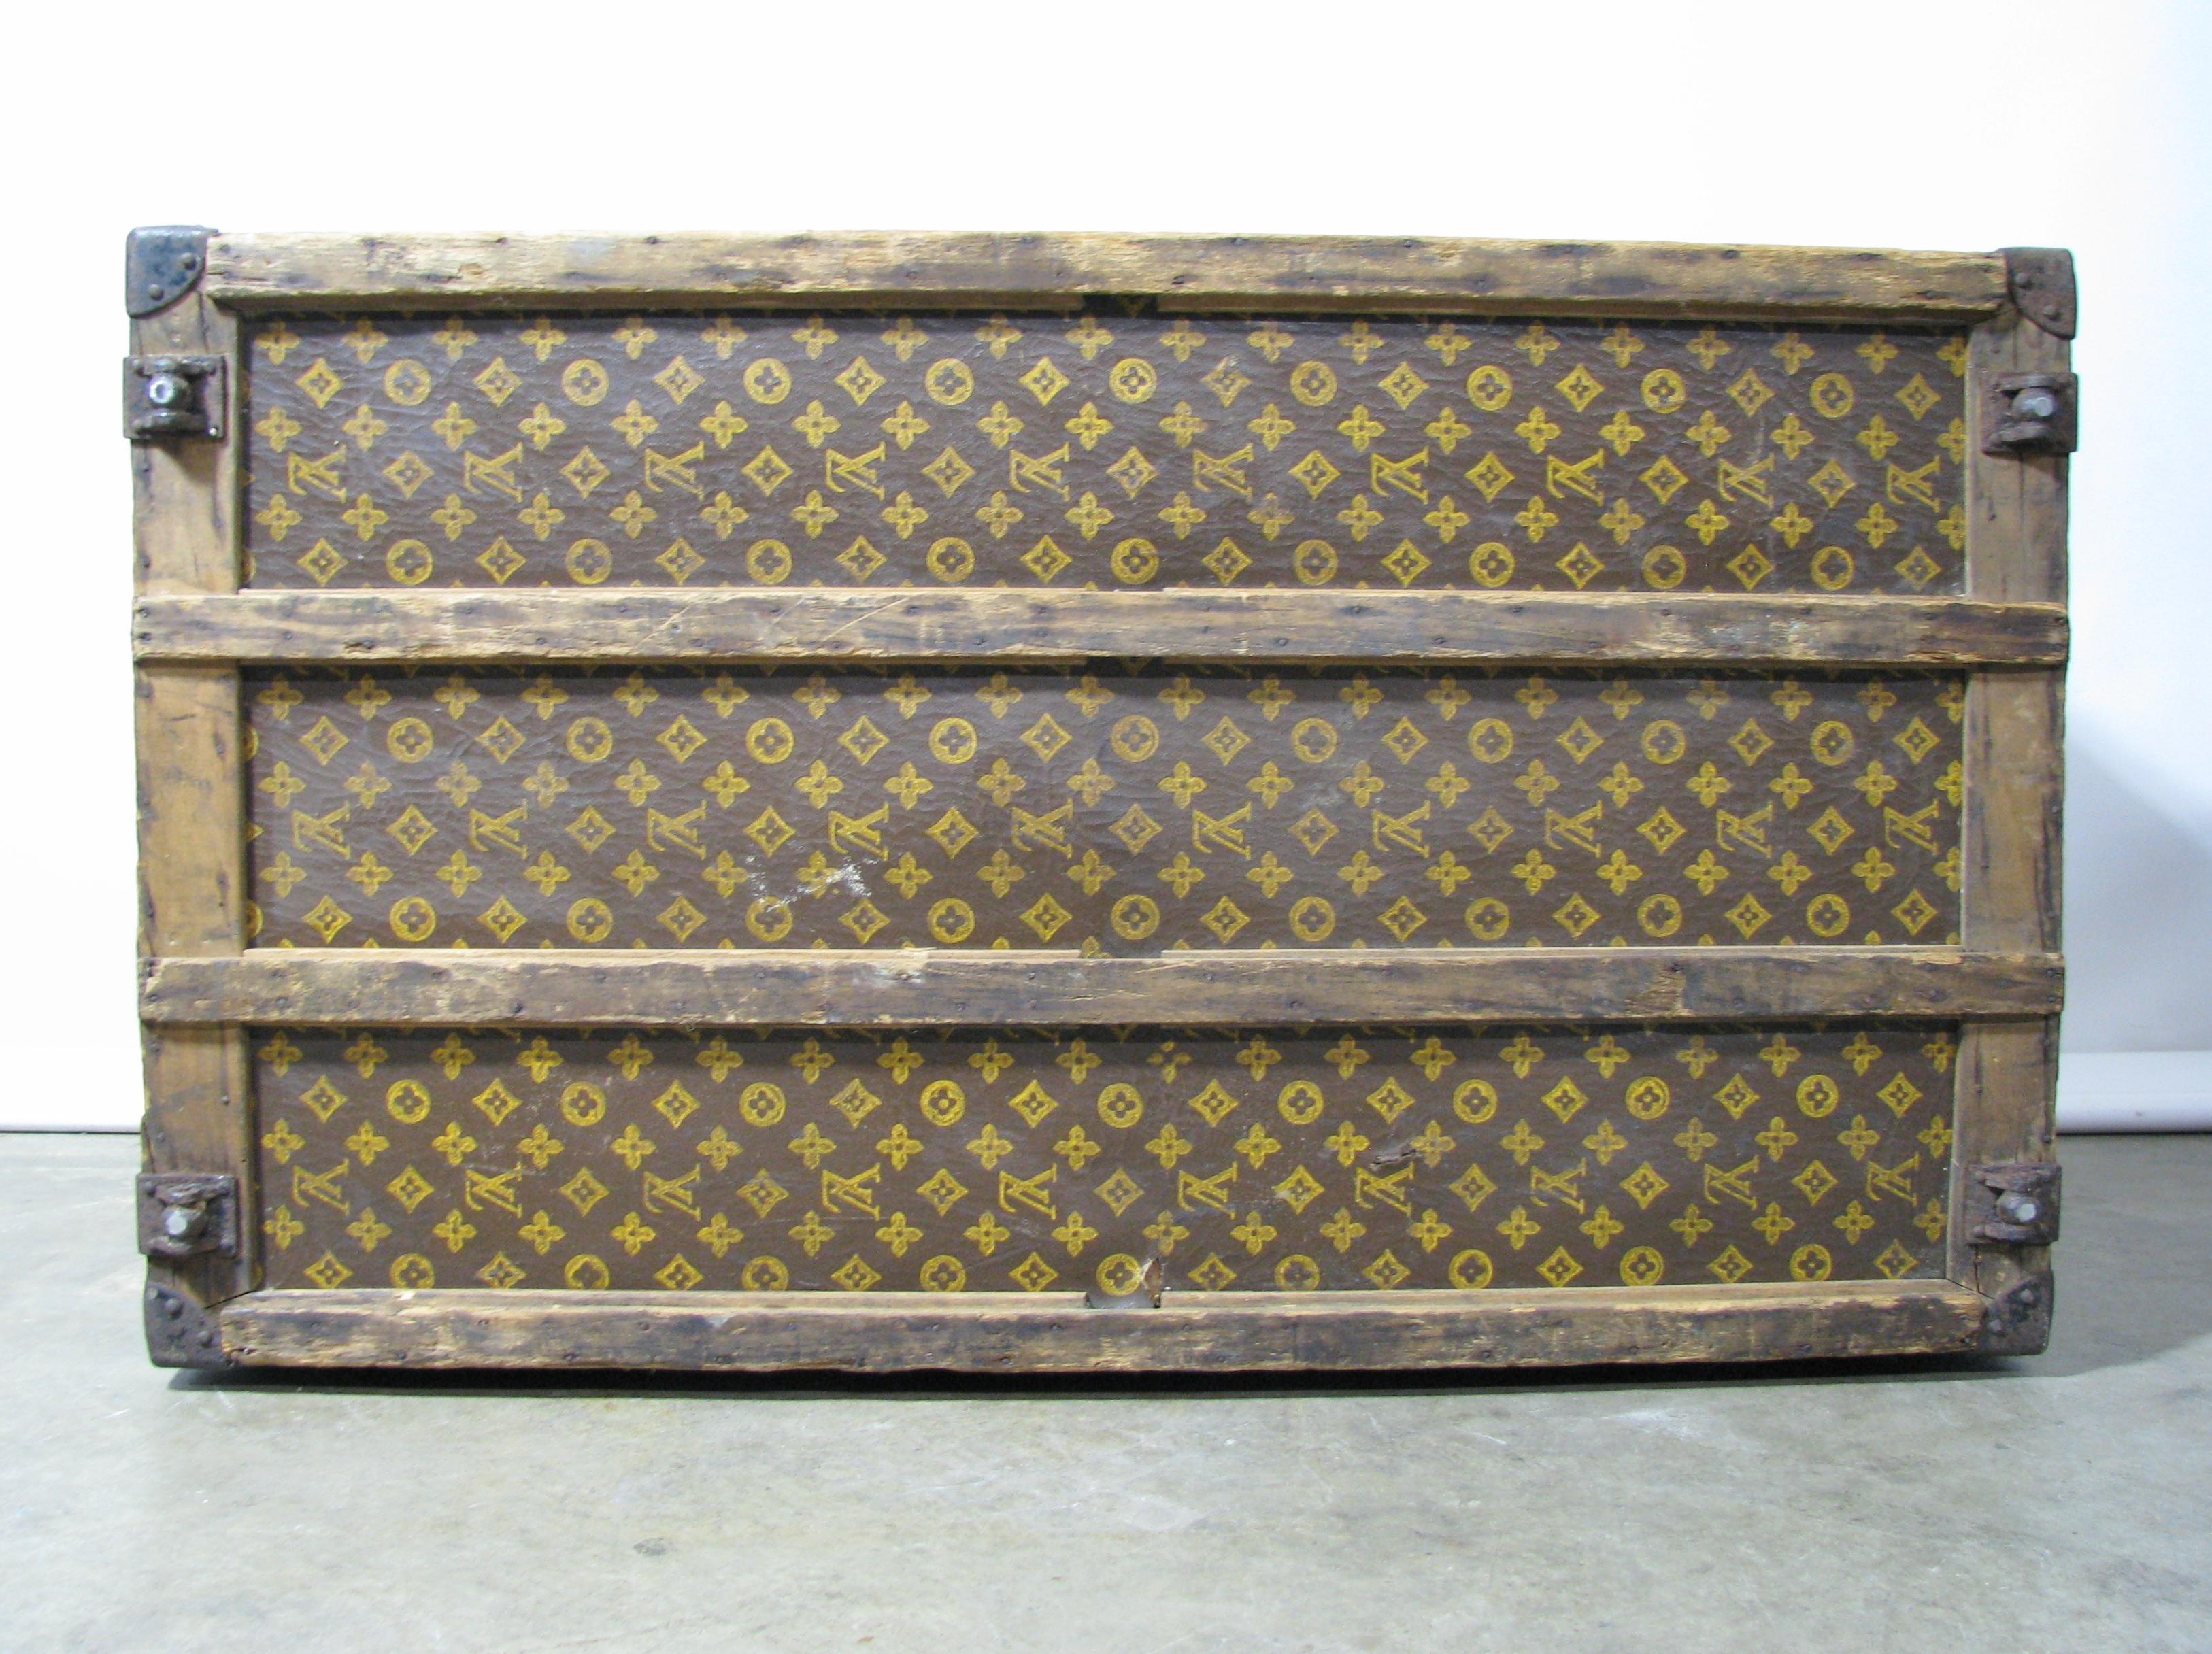 Vintage Late 1920s Louis Vuitton Steamer Trunk with Original Trays and Label For Sale 1